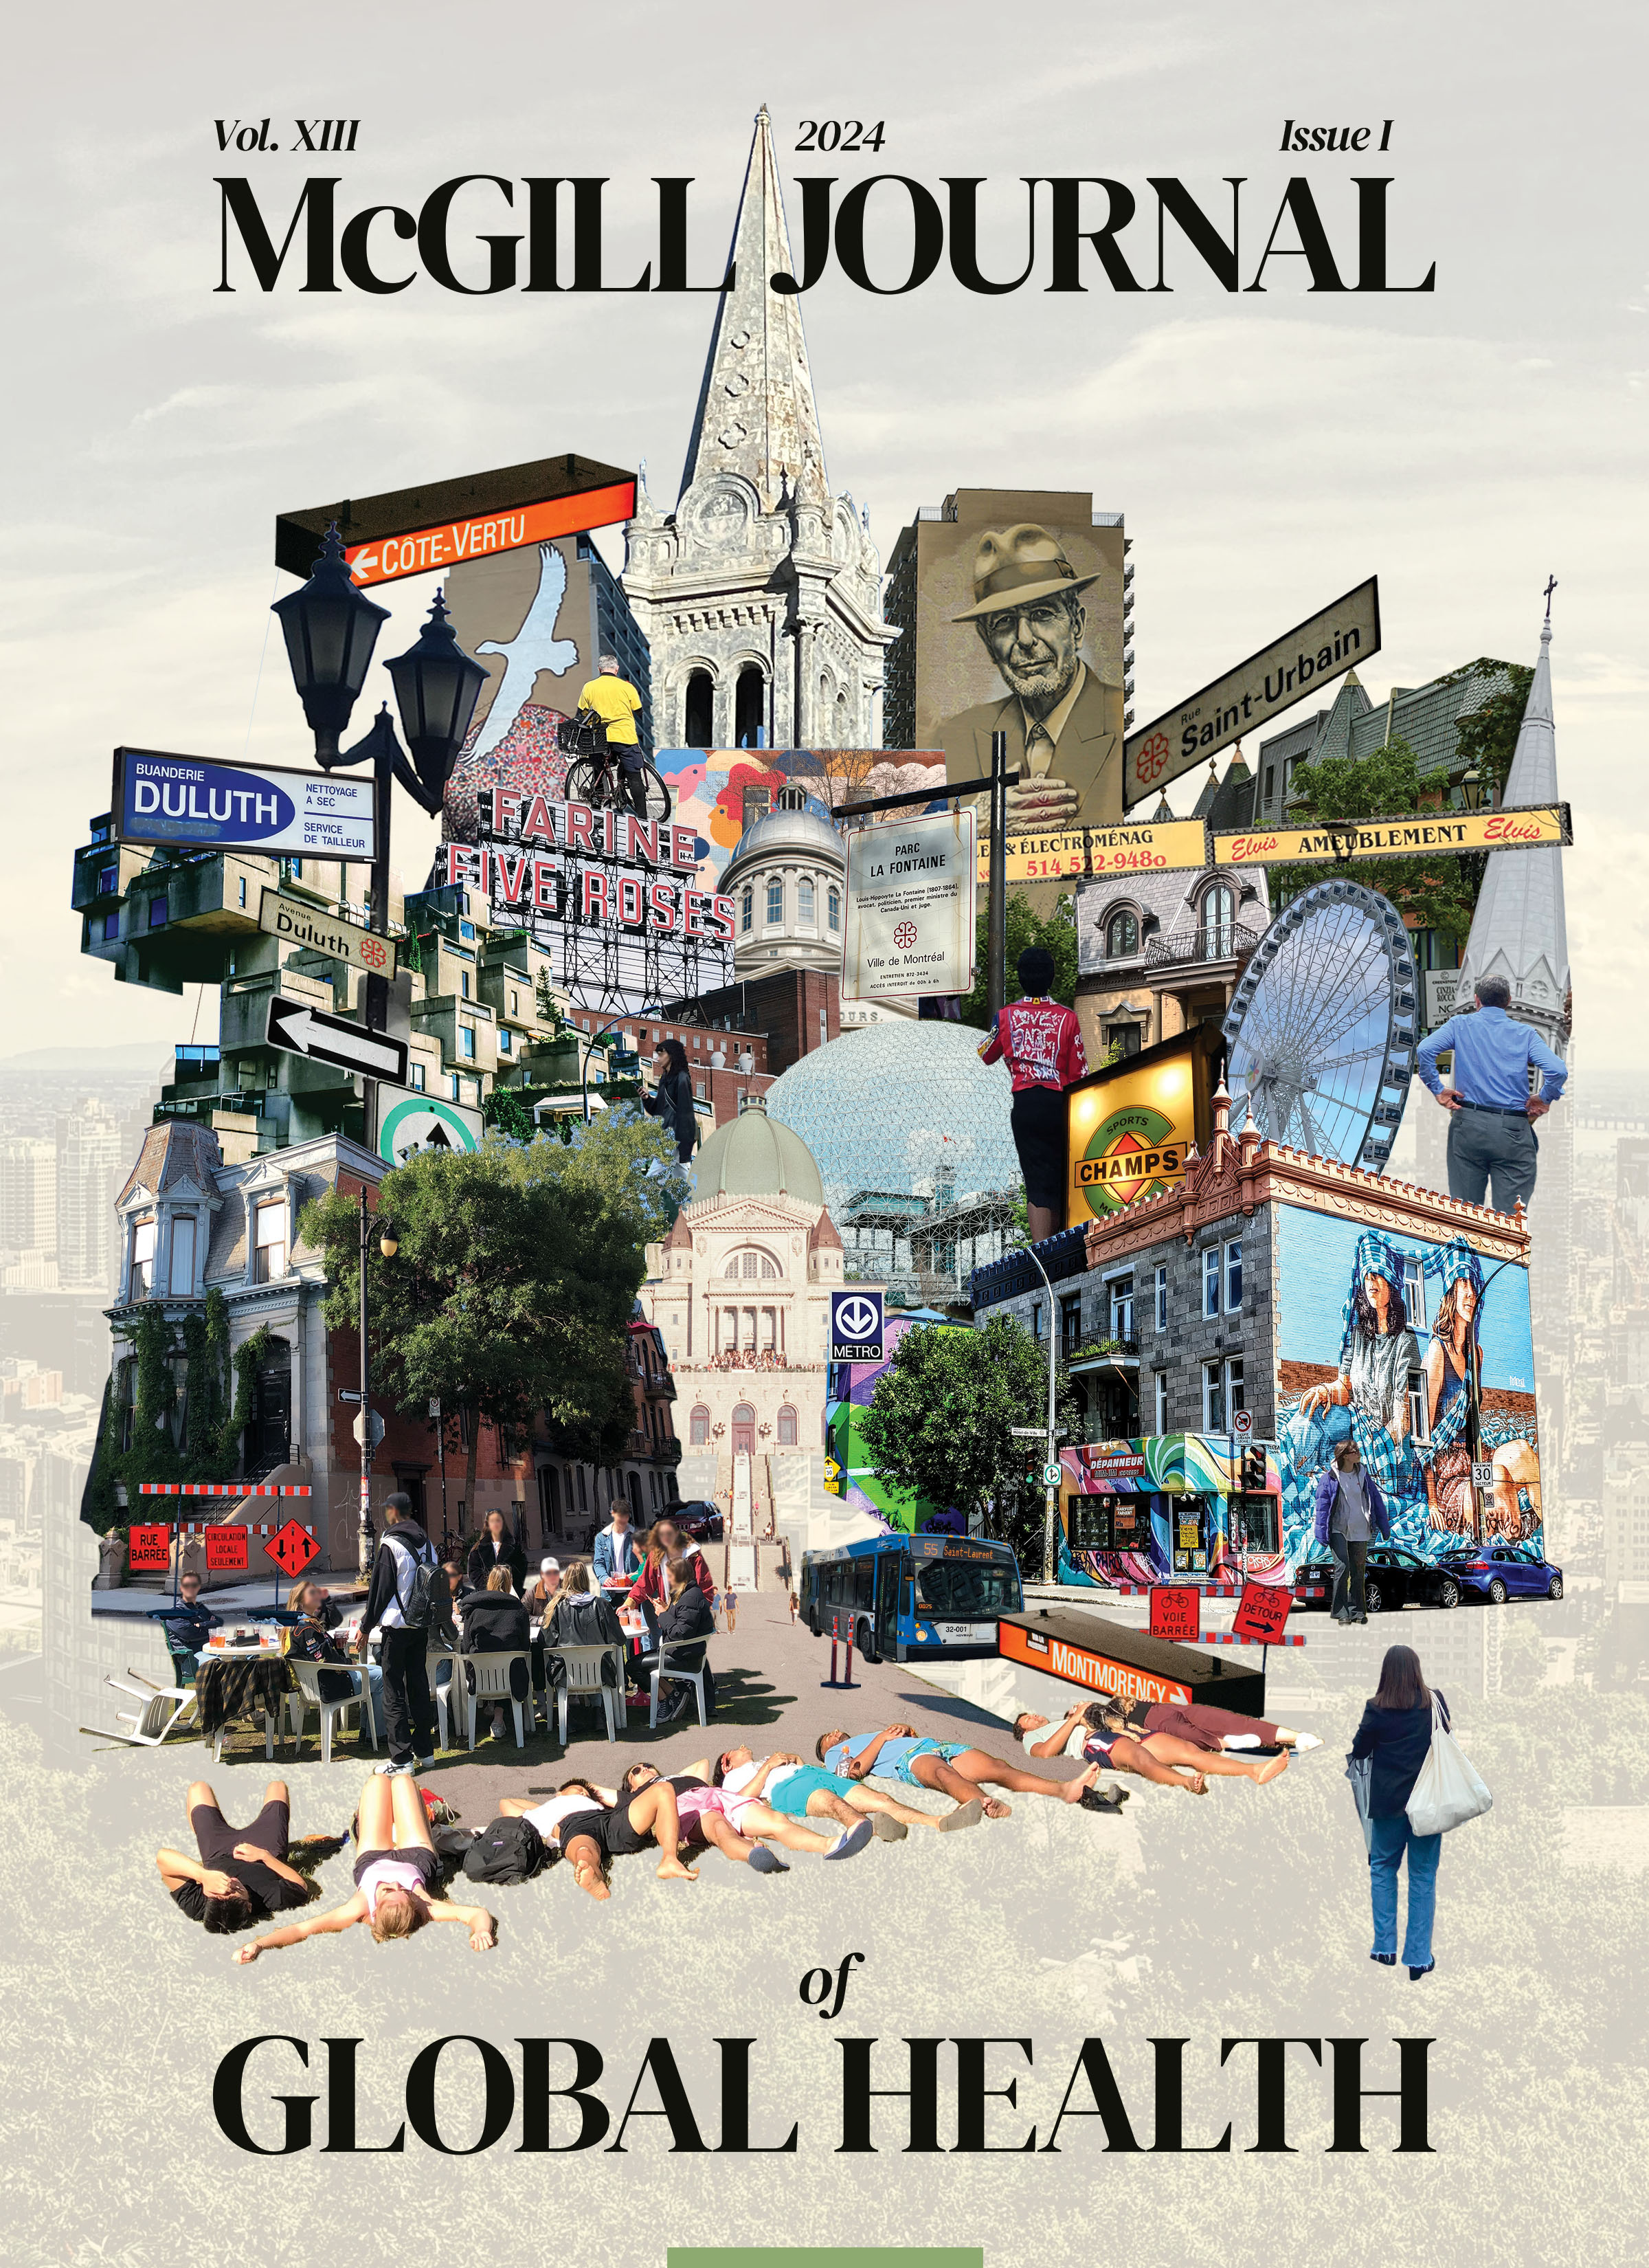 Cover image for the McGill Journal of Global Health Volume XIII (2024) Issue 1 with a collage of Montreal landmarks and imagery